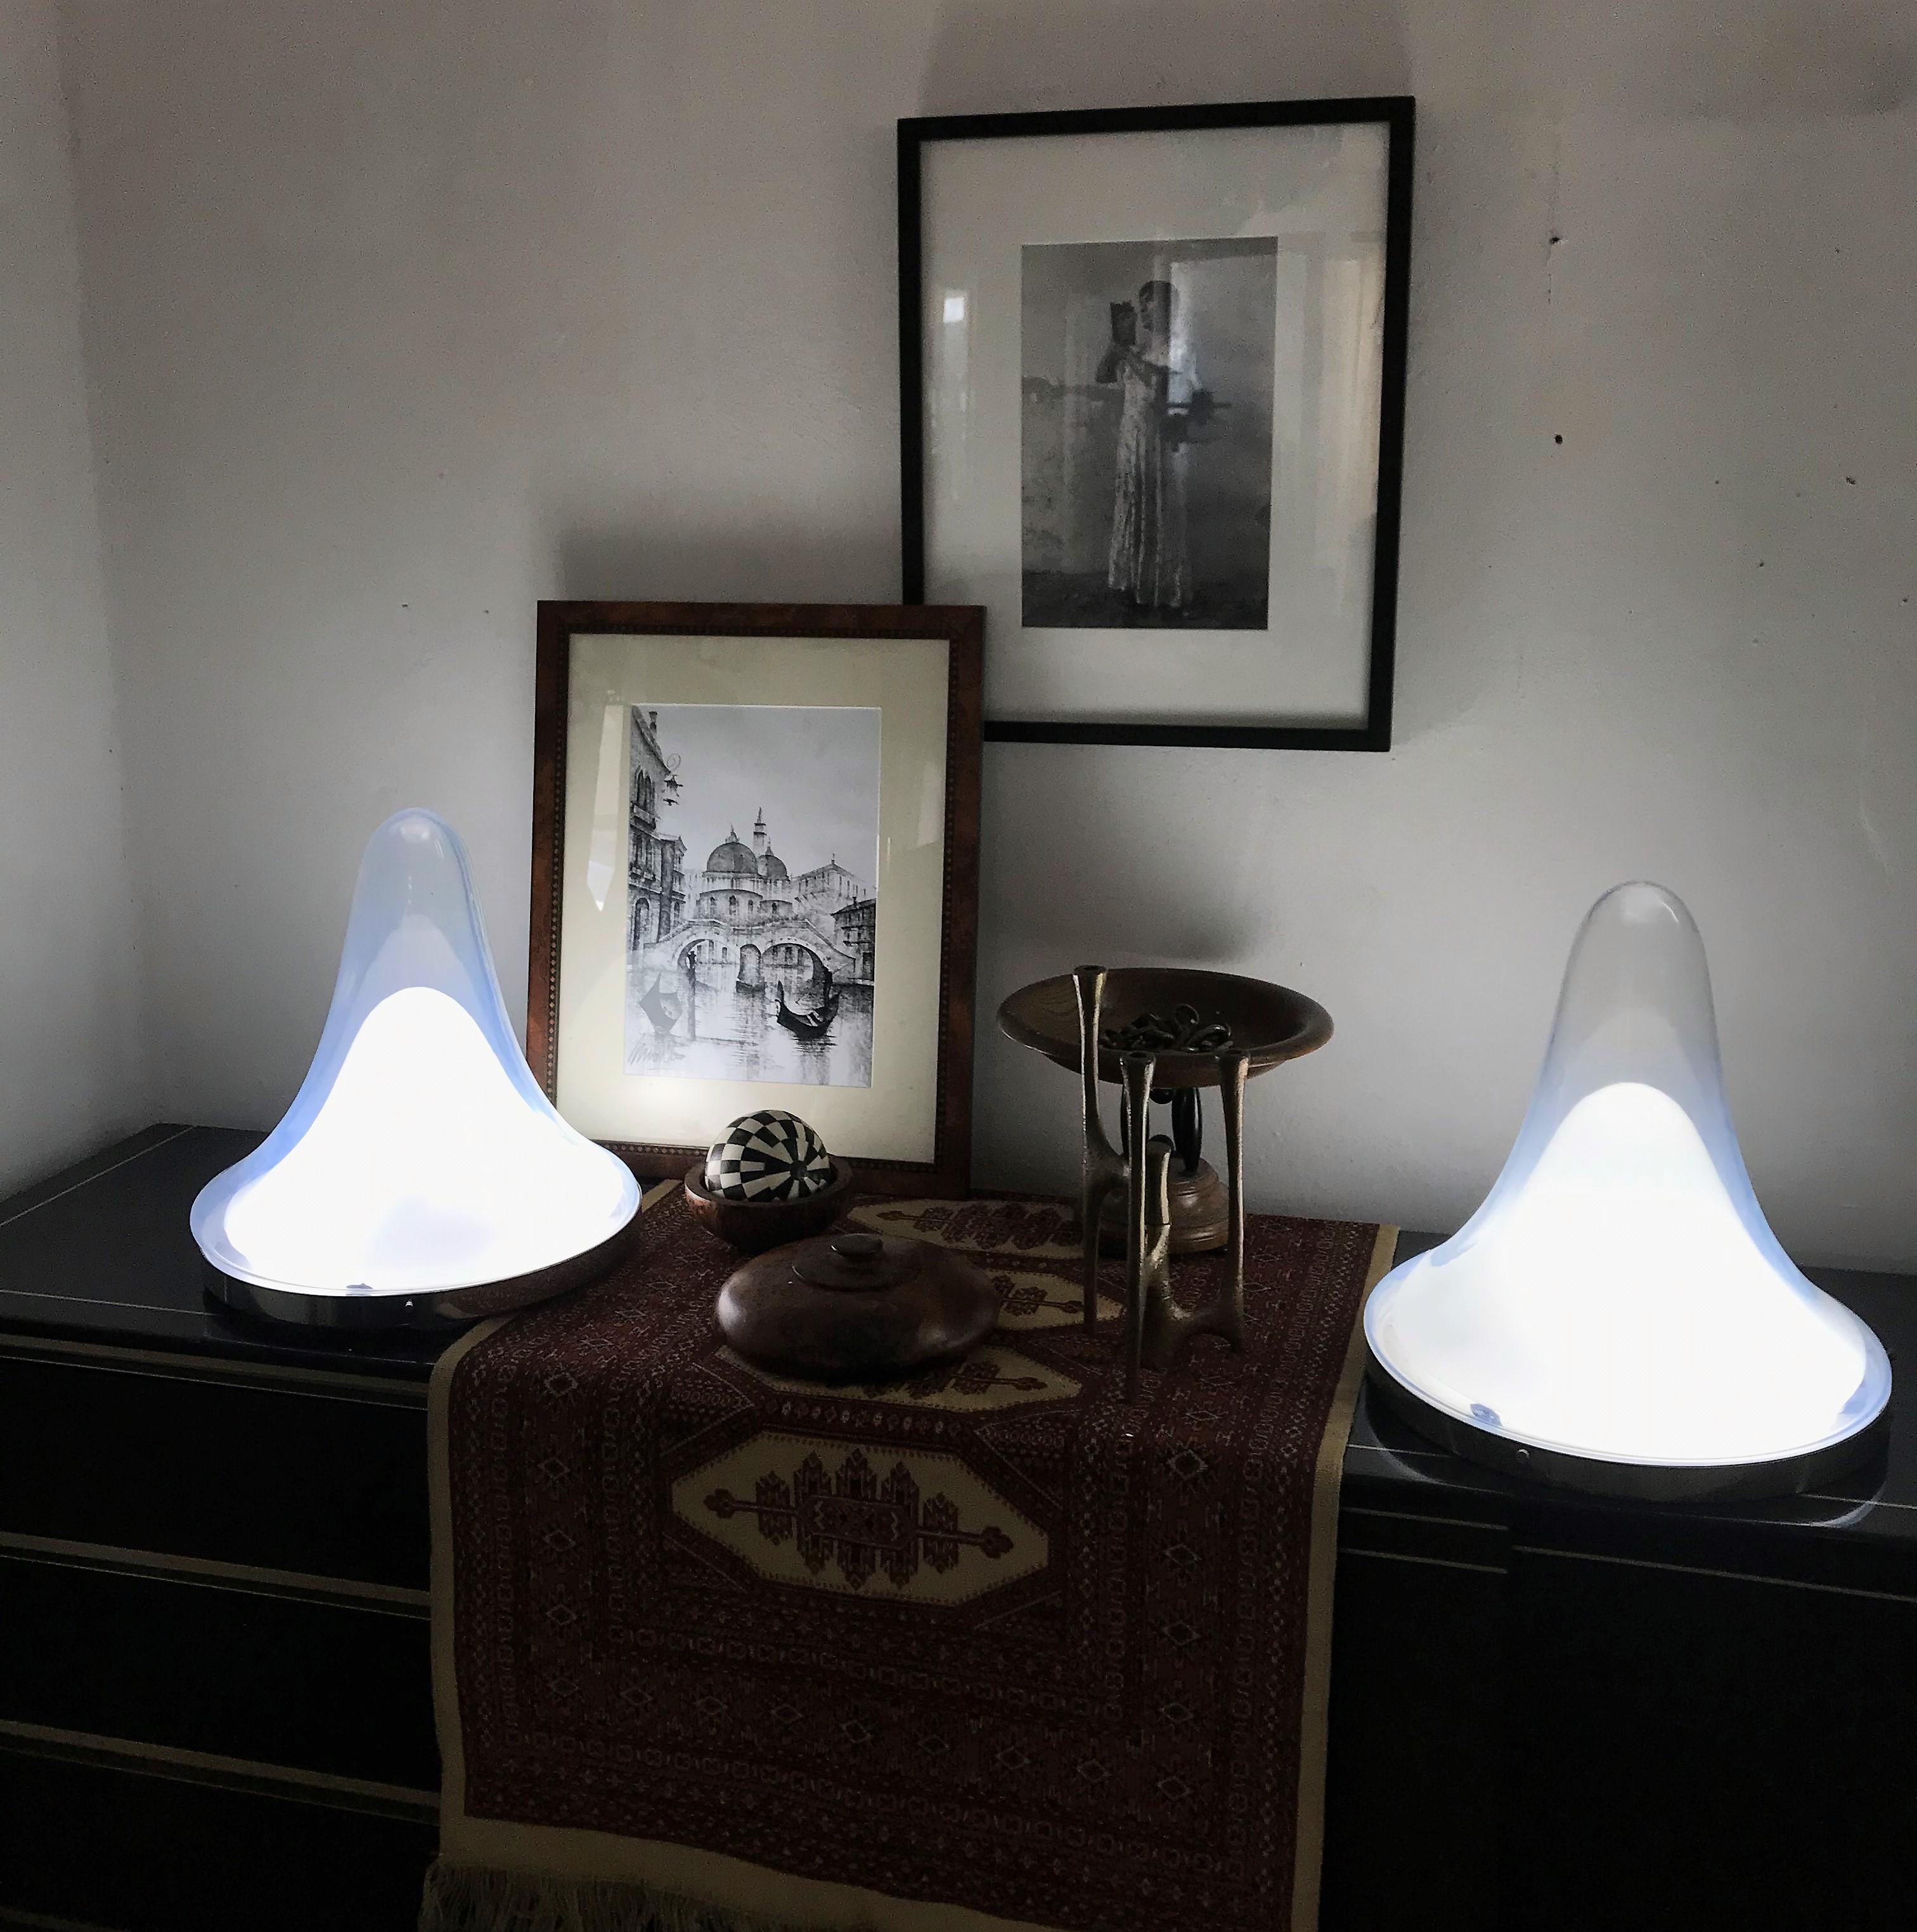 Beautiful pair of Mid-Century Modern table lamps designed by Carlo Nason for Mazzega, circa 1960.
Consists of a small white opaline glass and a larger opalescent one and silver toned hardware.
This lamps can be used as a table, ceiling or wall